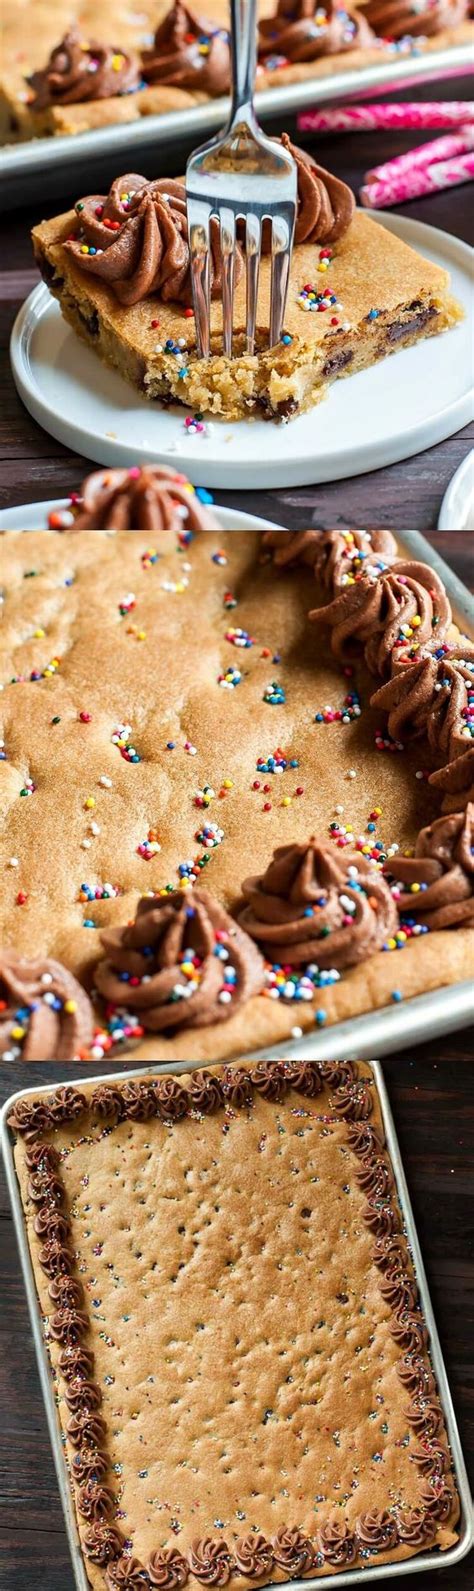 Sheet Pan Cookie Cake Recipe This Classic Chocolate Chip Cookie Cake